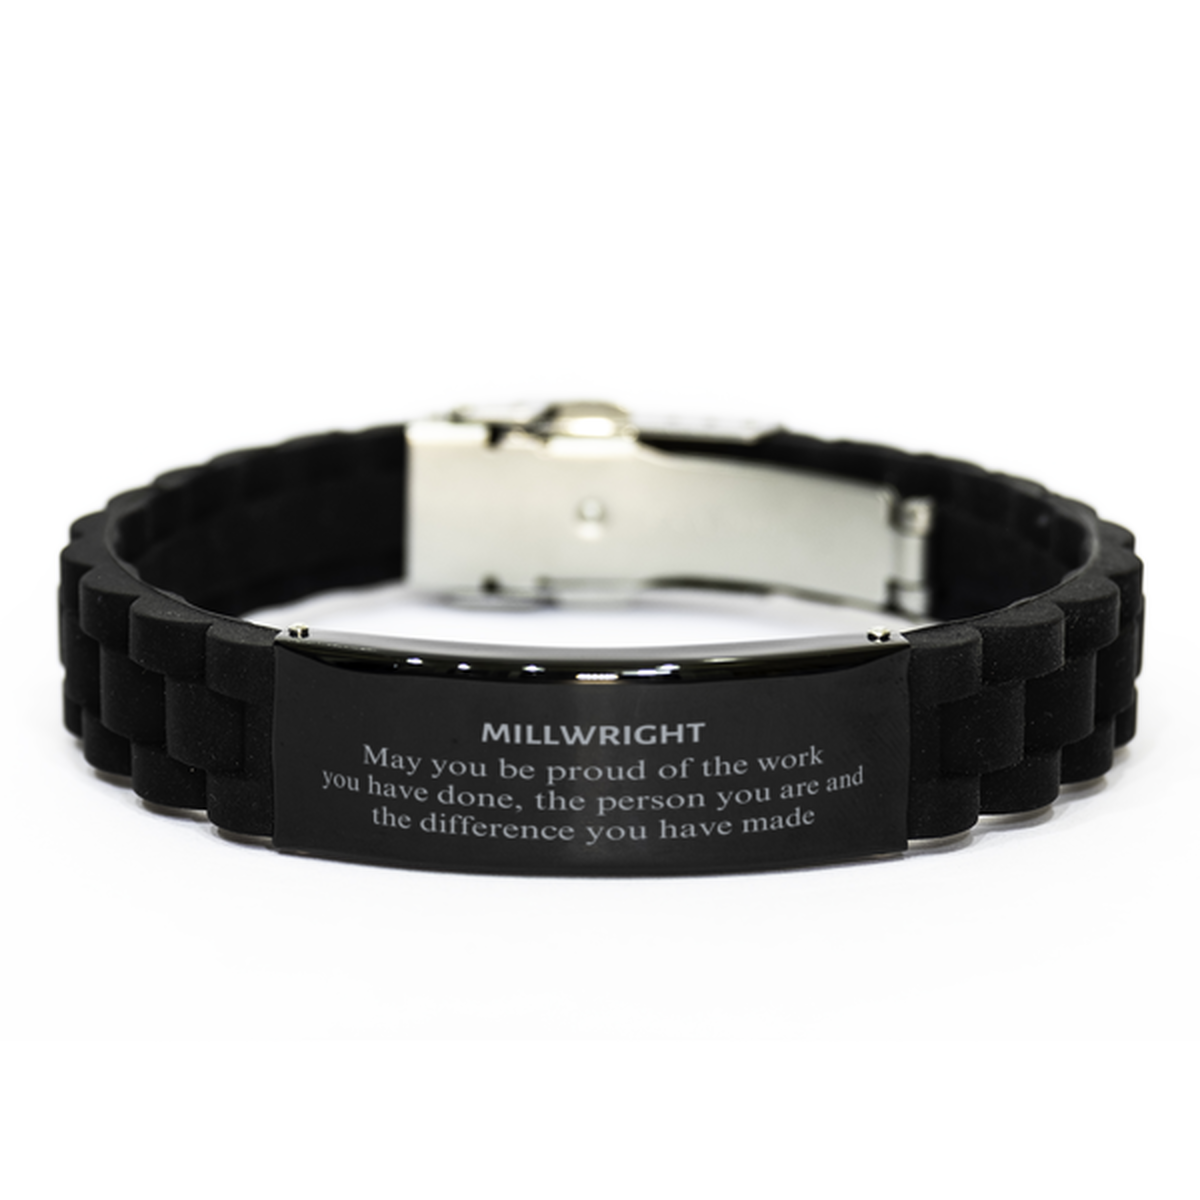 Millwright May you be proud of the work you have done, Retirement Millwright Black Glidelock Clasp Bracelet for Colleague Appreciation Gifts Amazing for Millwright